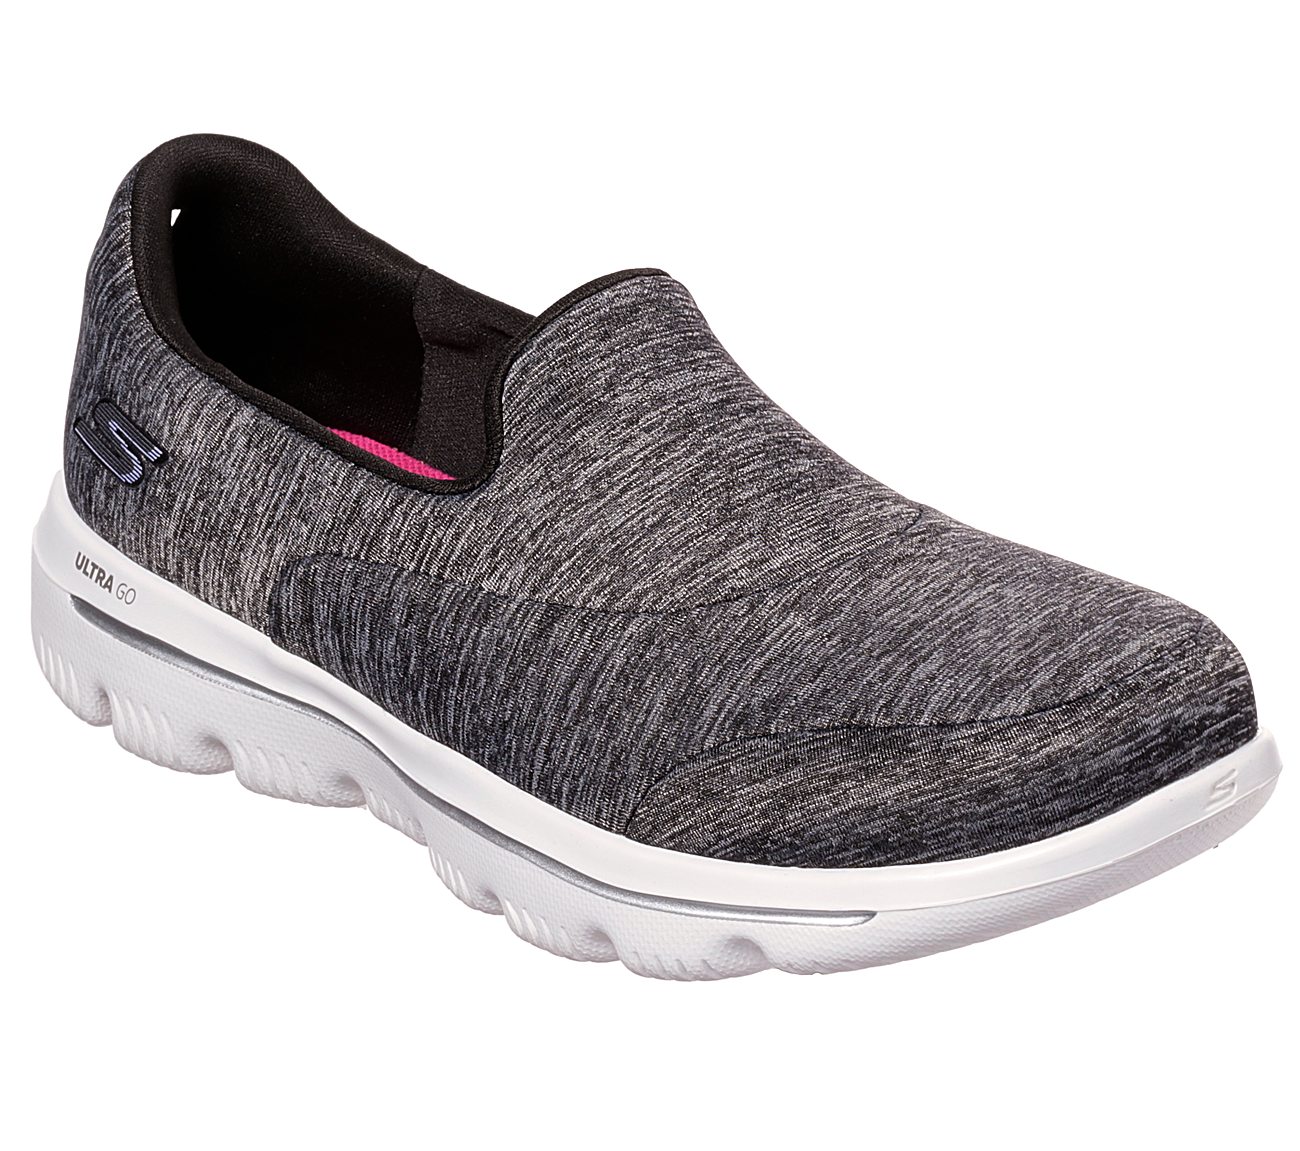 Here Are The Top 5 Things To Look For In A Pair Of Skechers Diabetic Shoes